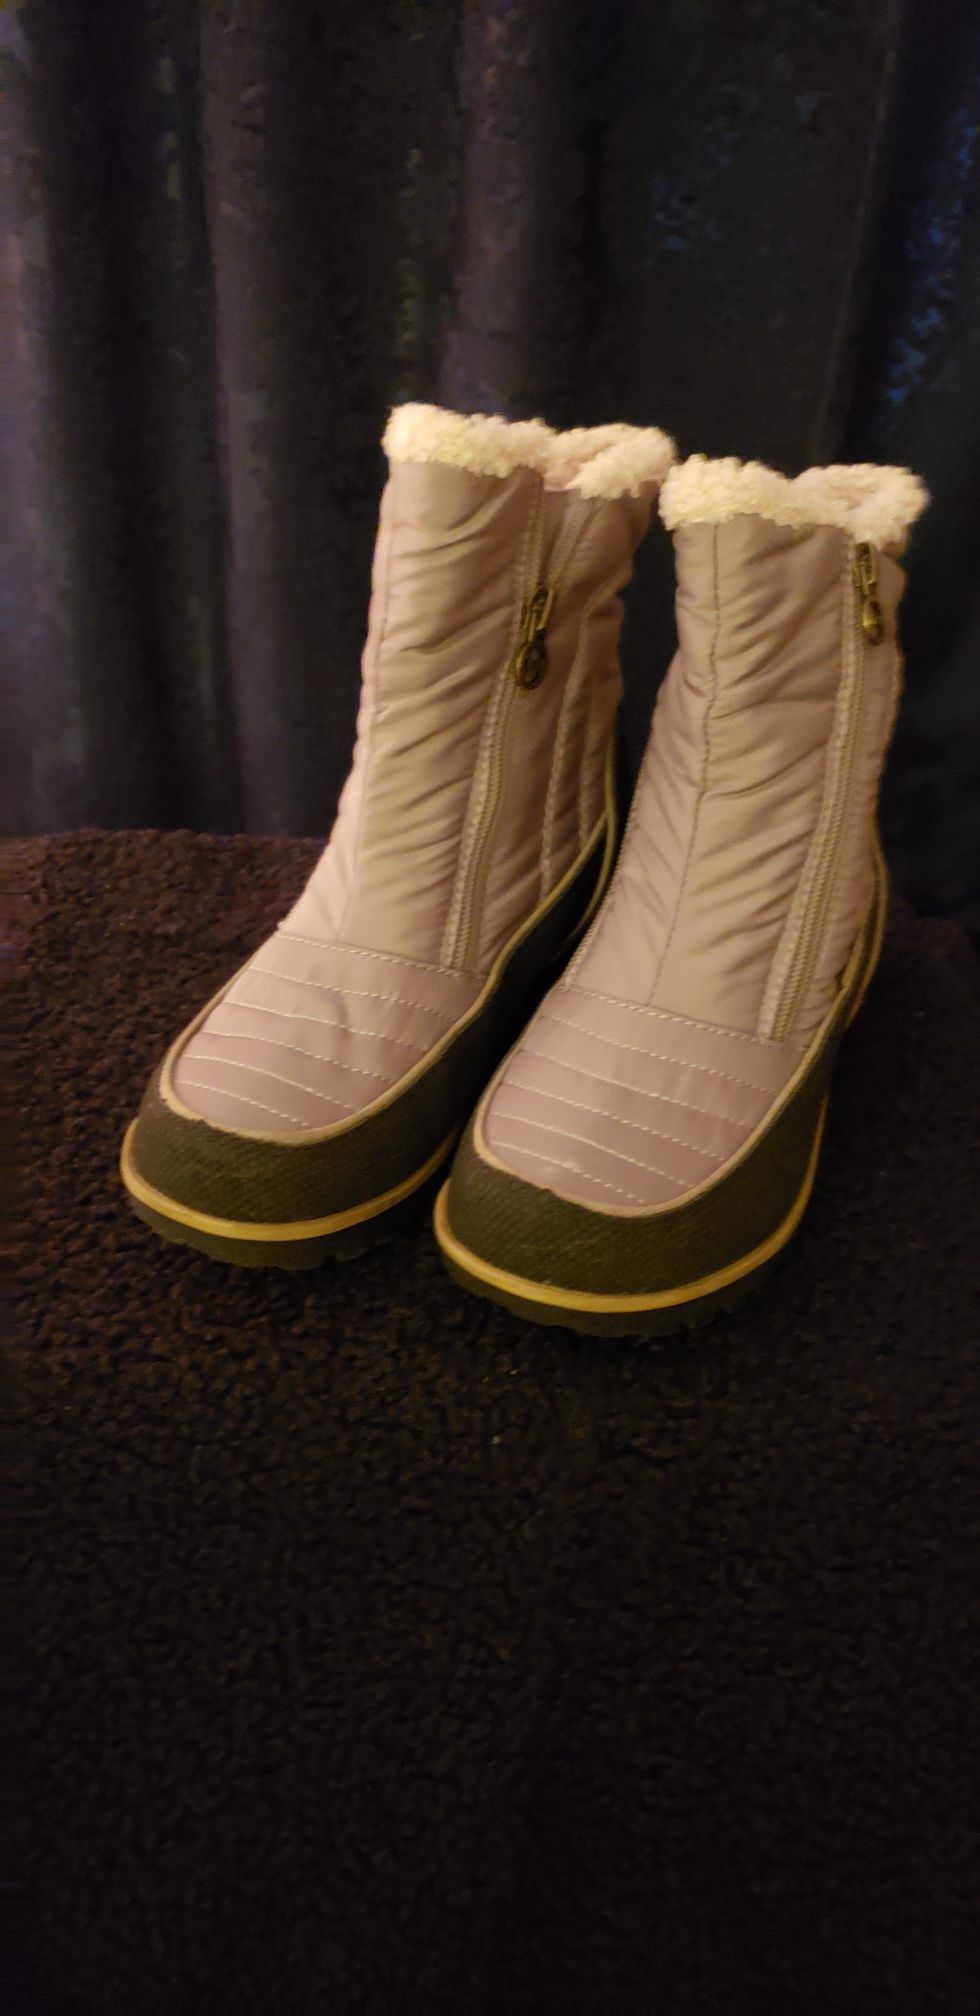 JUB beige&black rain resistant all weather and all turain boots 6